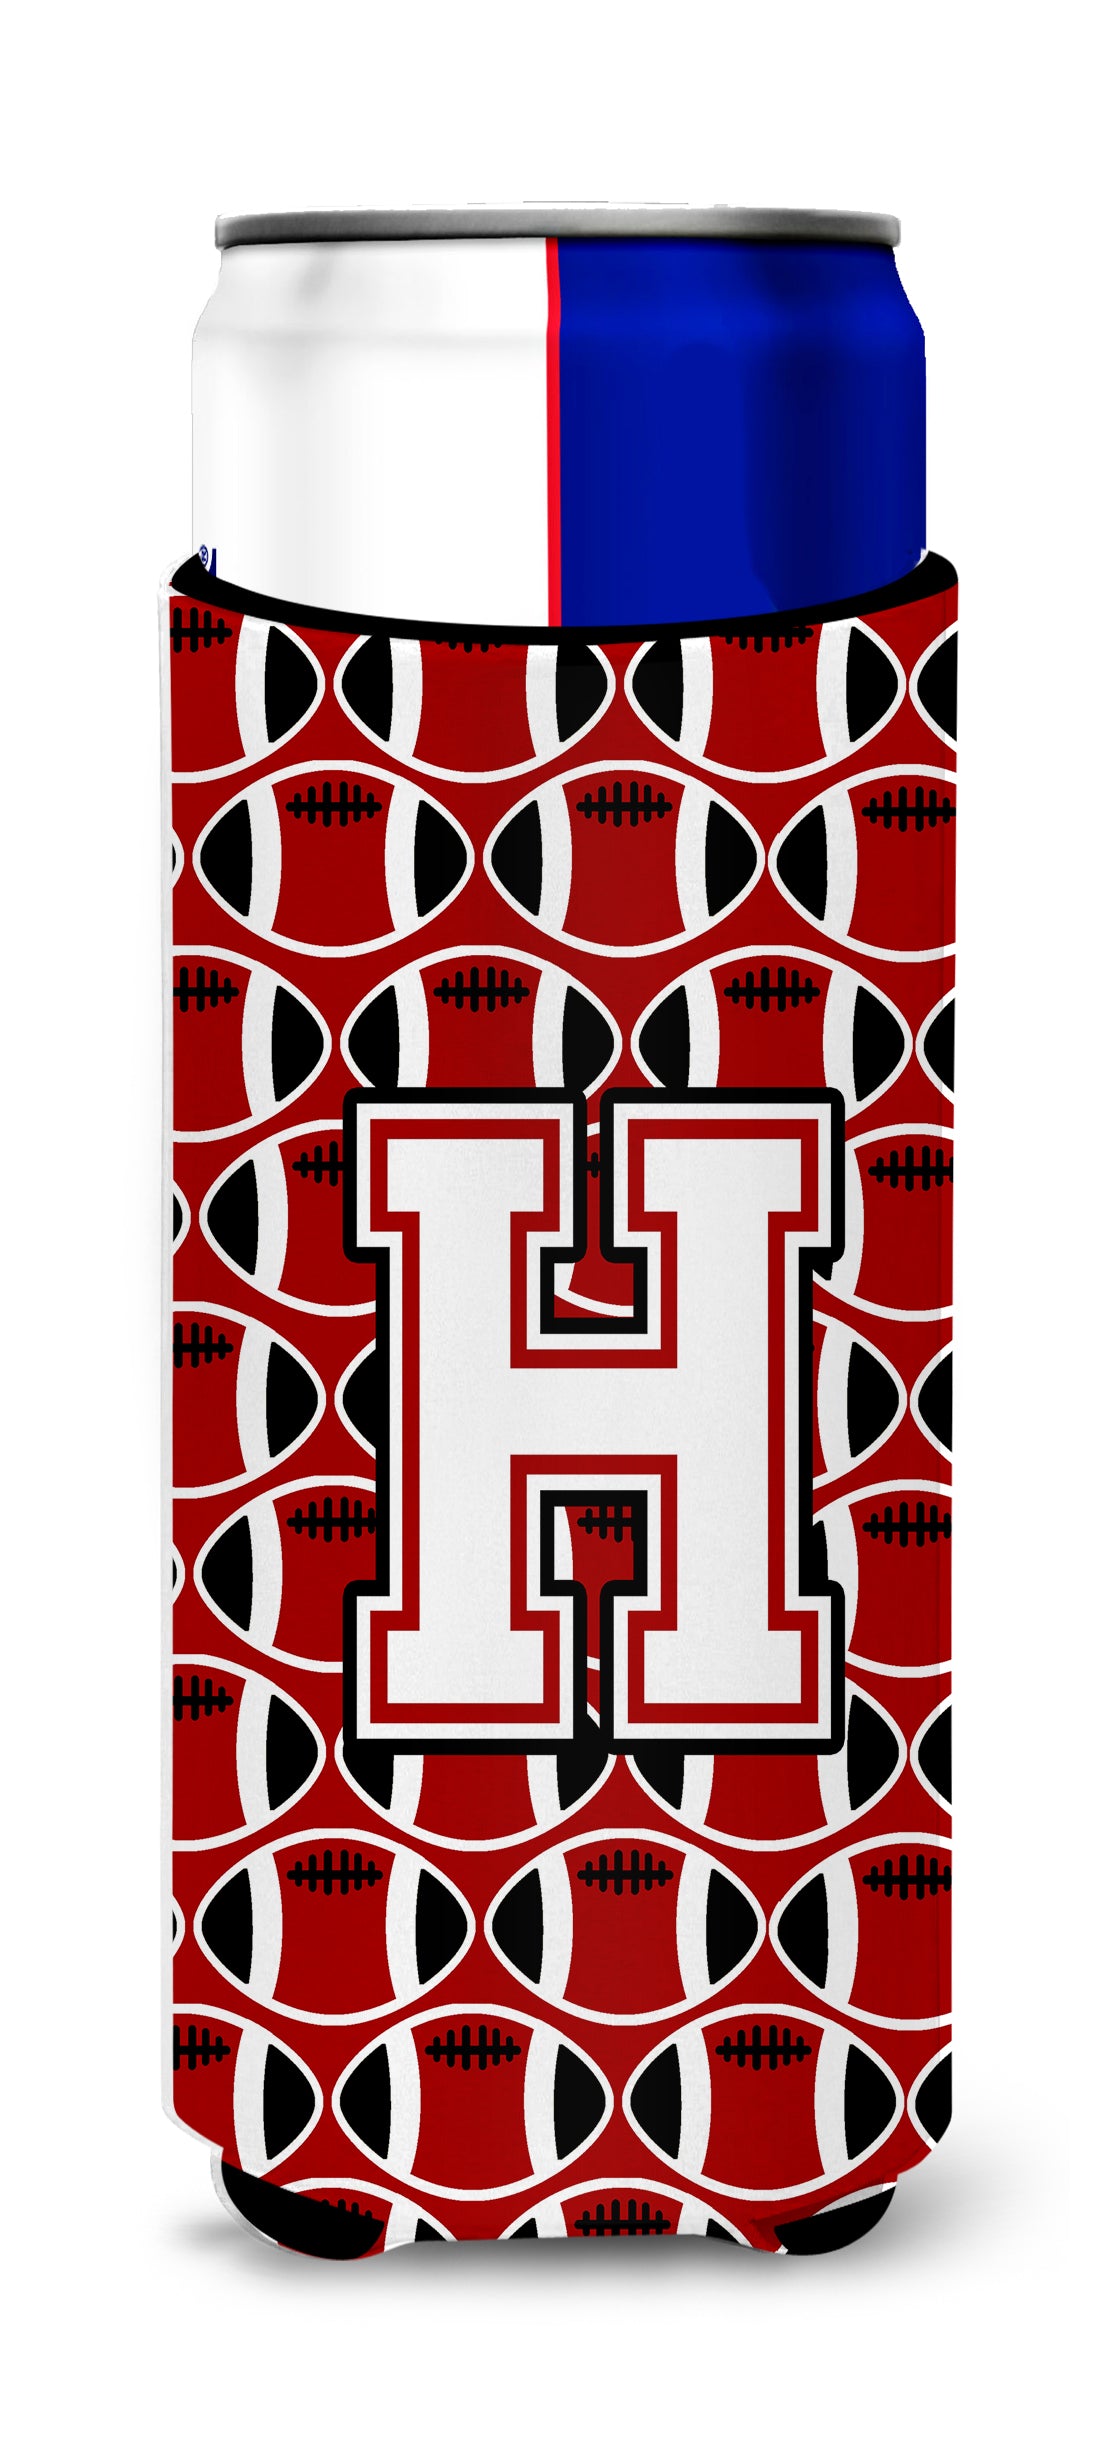 Letter H Football Cardinal and White Ultra Beverage Insulators for slim cans CJ1082-HMUK.